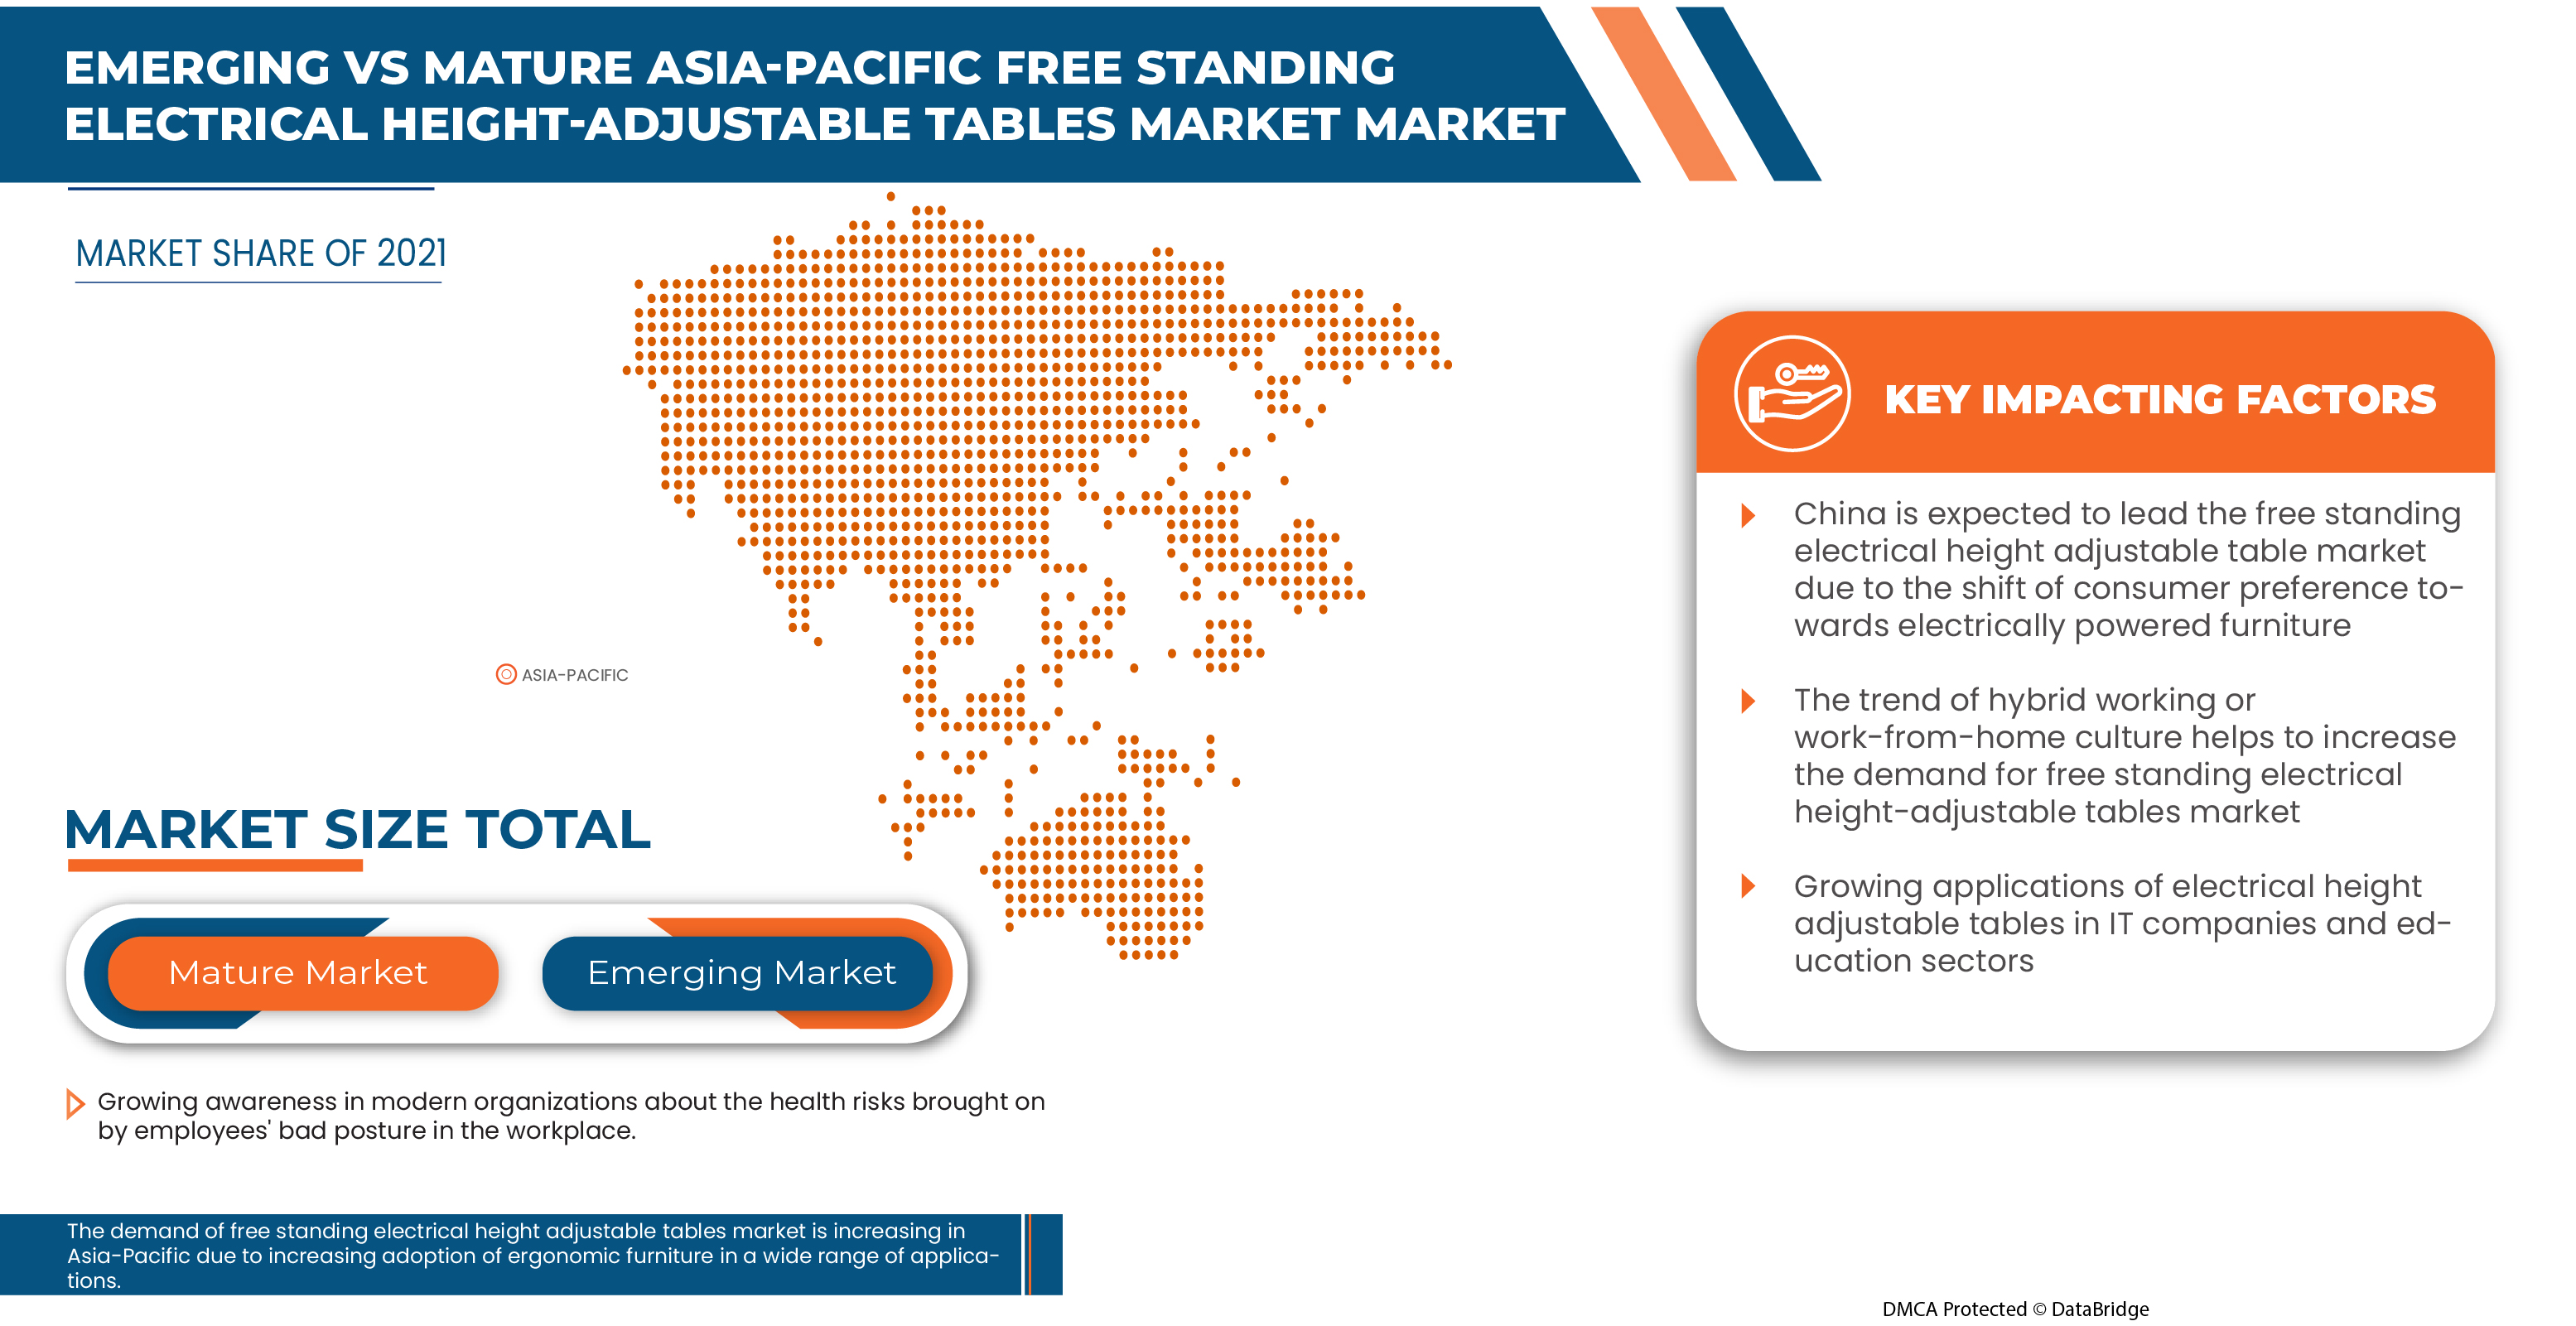 Asia-Pacific Free Standing Electrical Height-Adjustable Tables Market